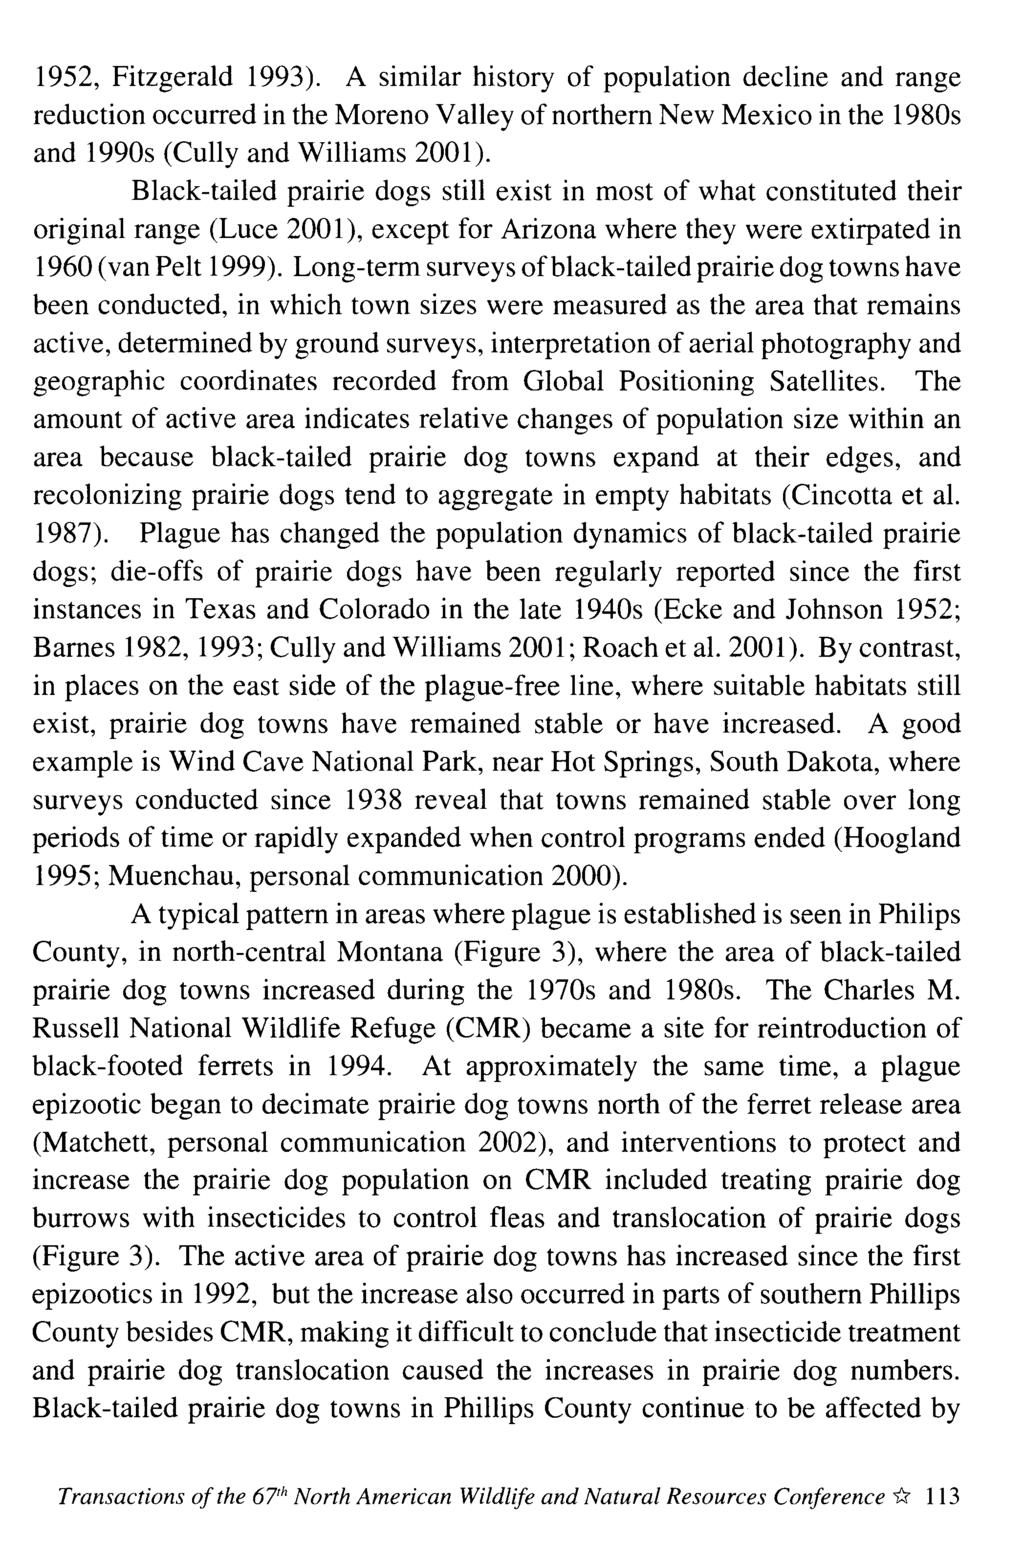 1952, Fitzgerald 1993). A similar history of population decline and range reduction occurred in the Moreno Valley of northern New Mexico in the 1980s and 1990s (Cully and Williams 2001).